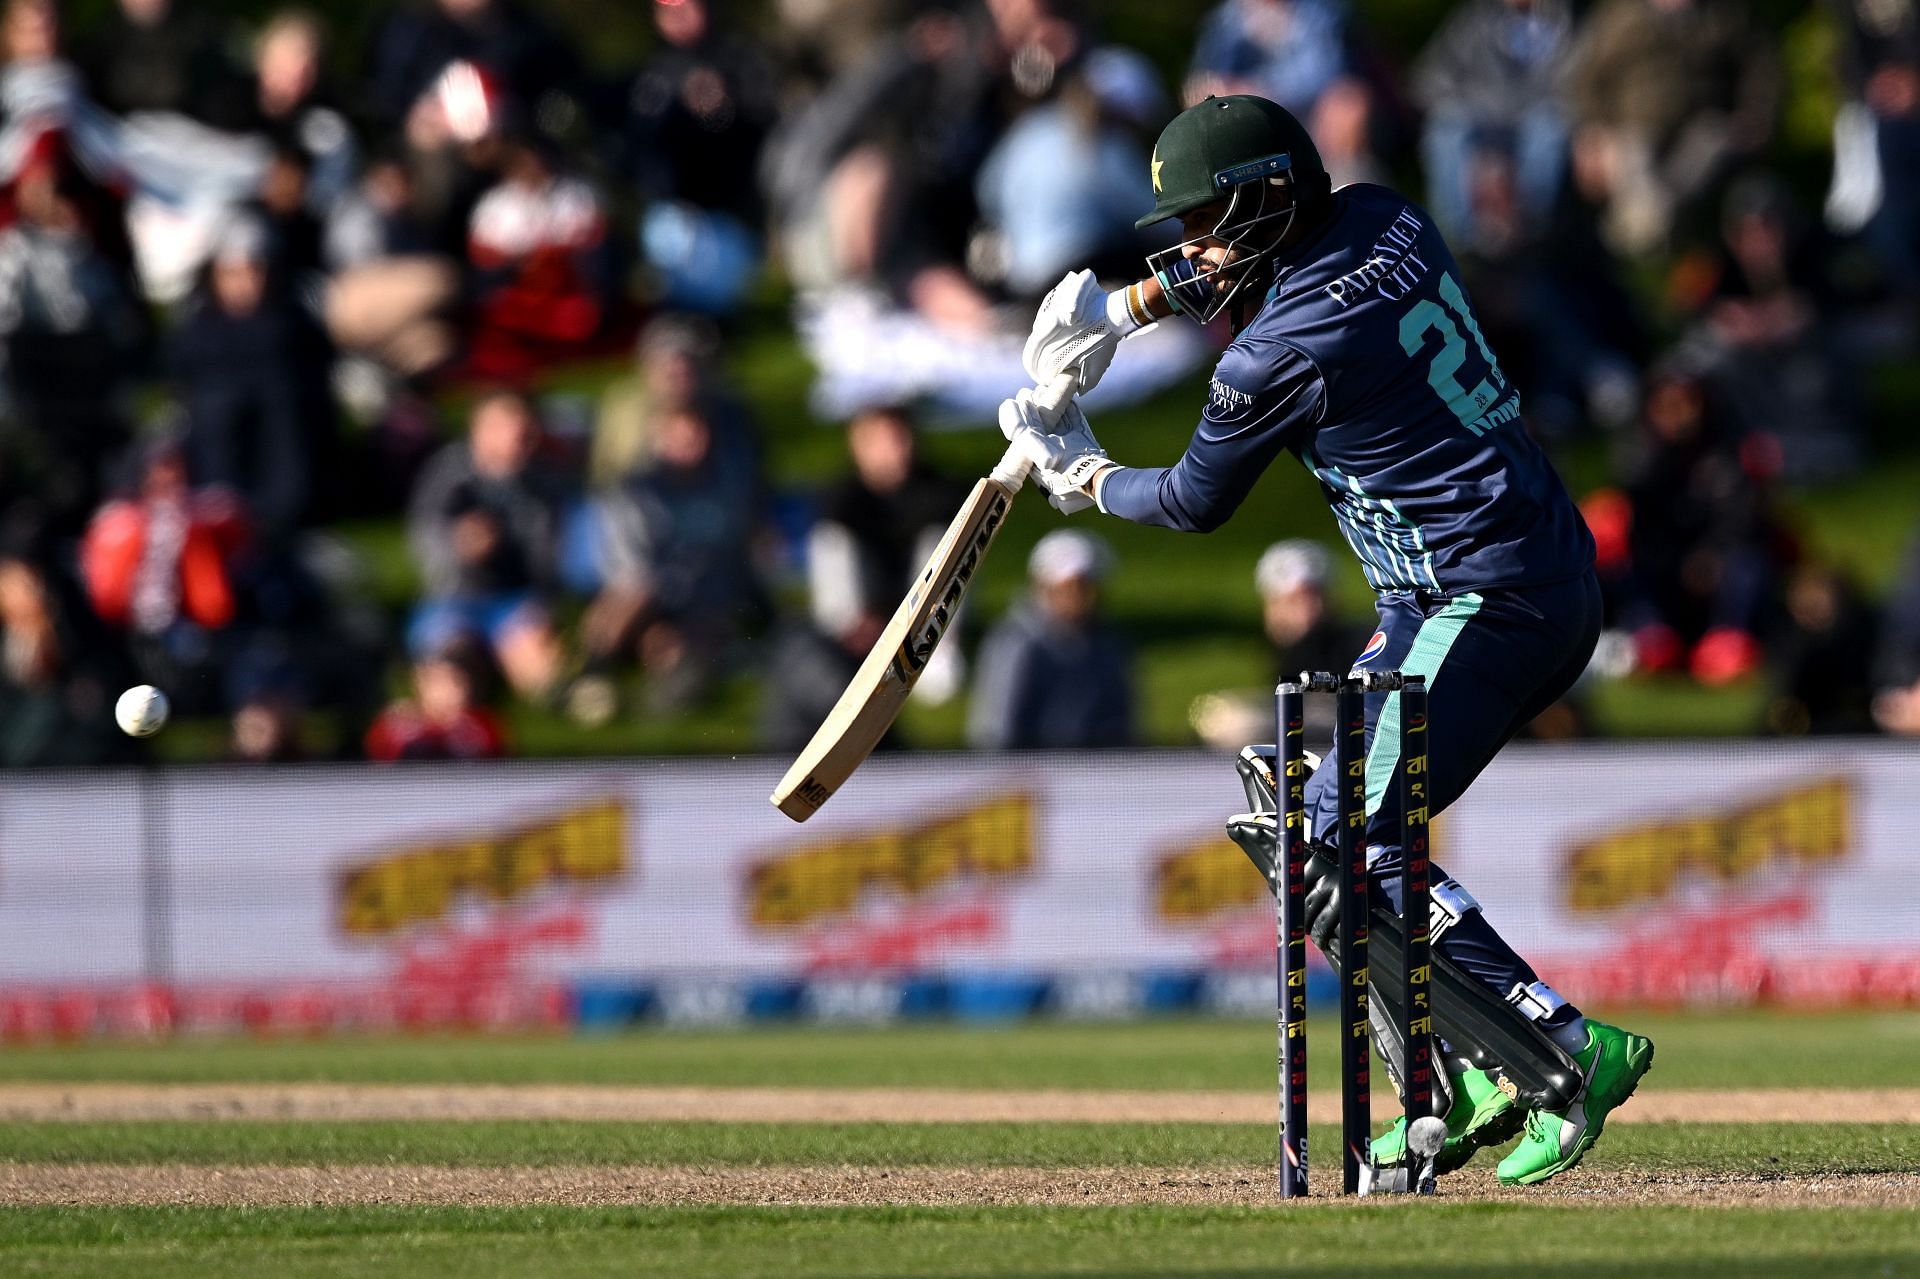 Mohammad Nawaz in action during the tri-nation series in New Zealand. (Credits: Getty)